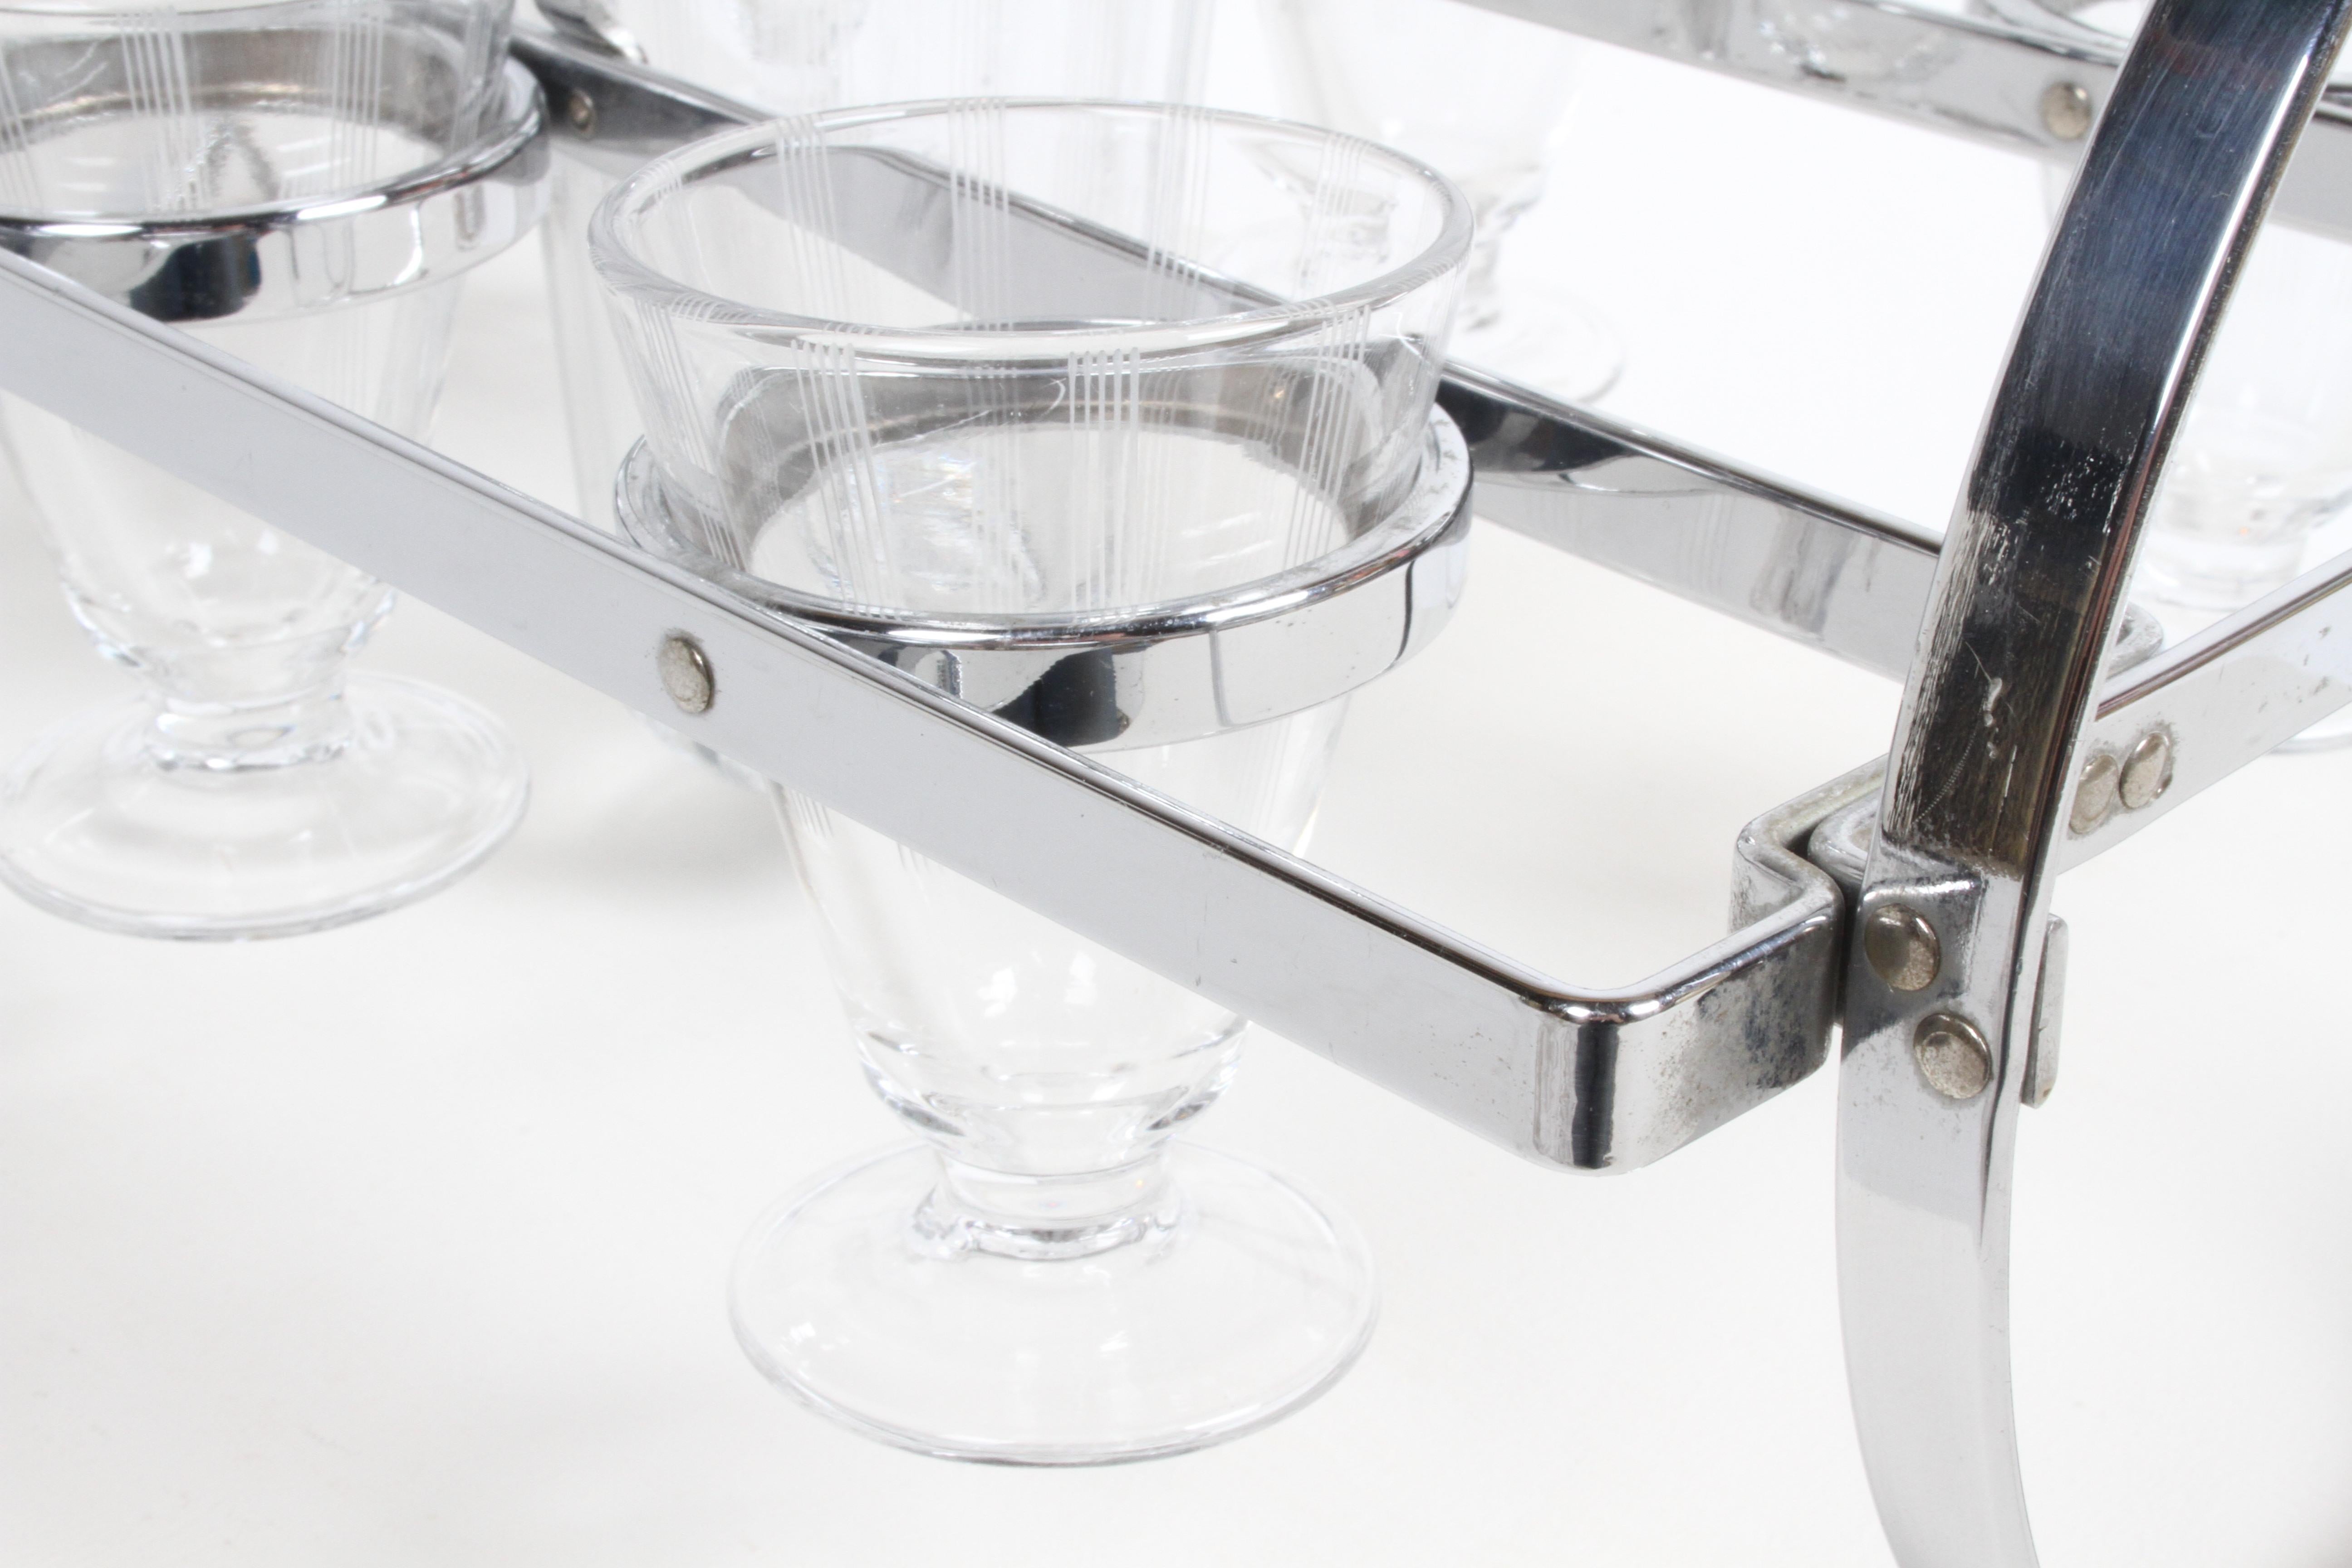 1930s Art Deco Chrome Cocktail Shaker with Six Glasses on Gyroscopic Caddy Stand For Sale 6